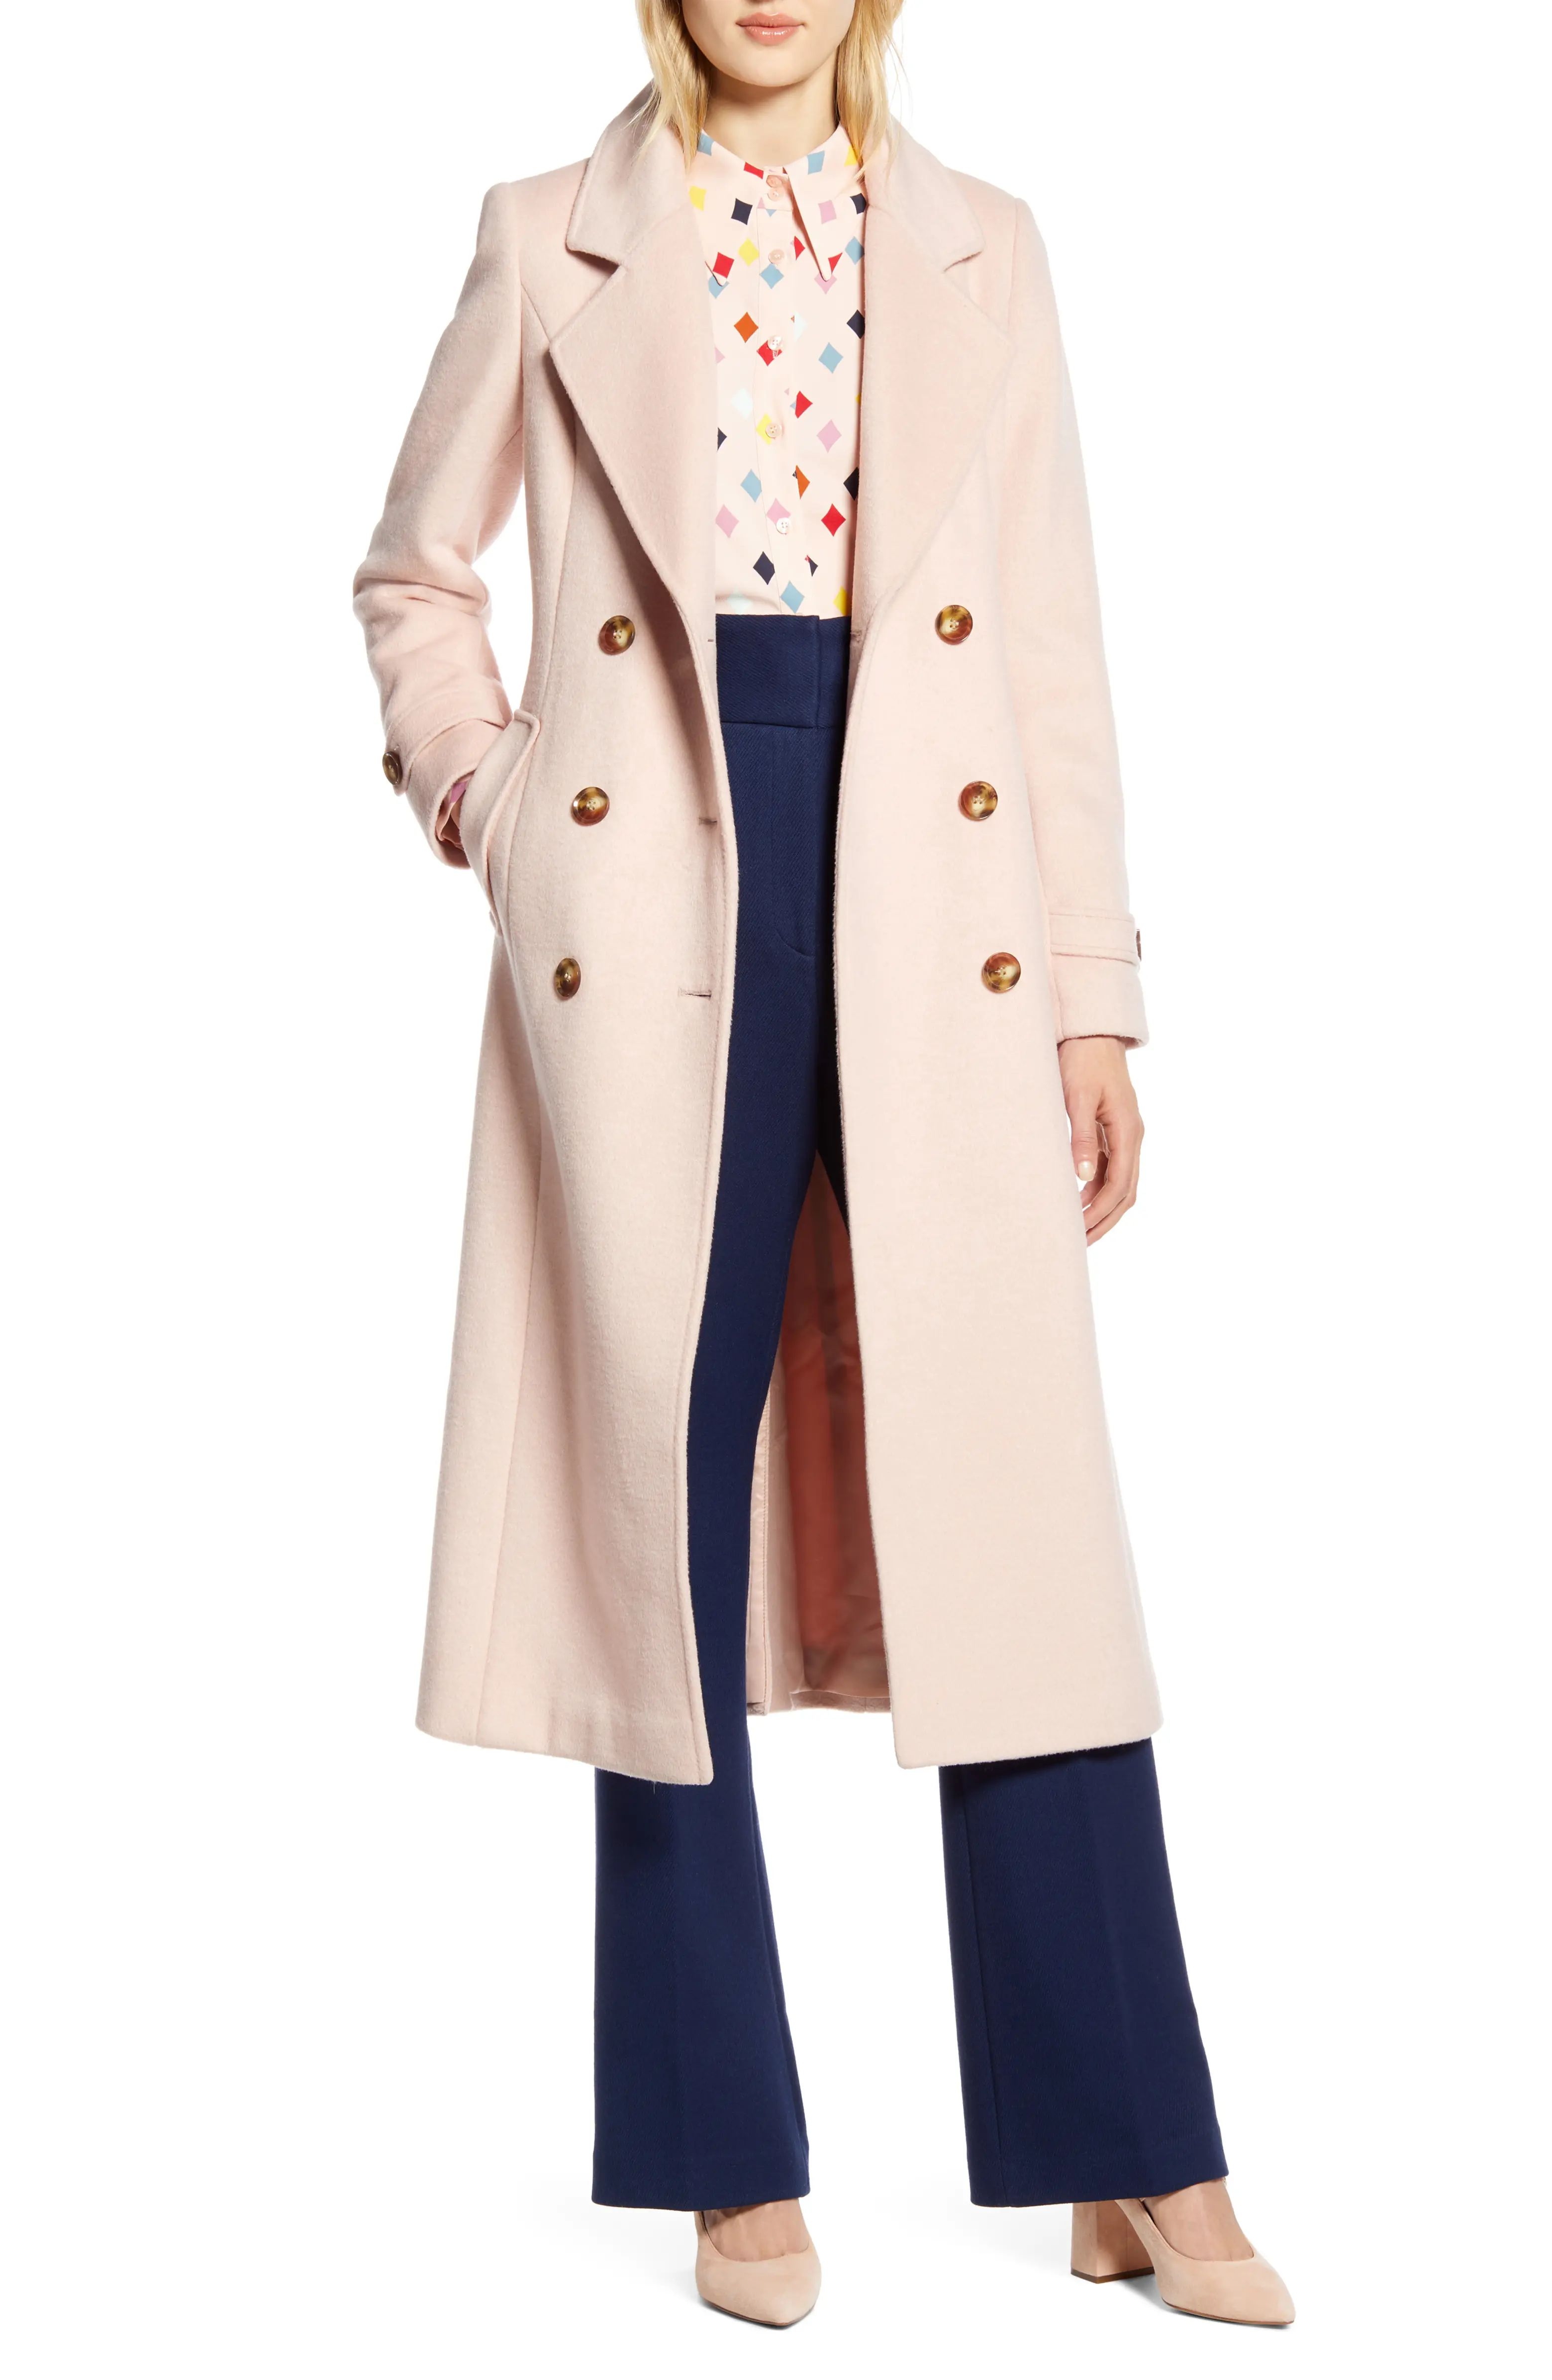 x Atlantic-Pacific Long Wool Blend Trench Coat | Nordstrom